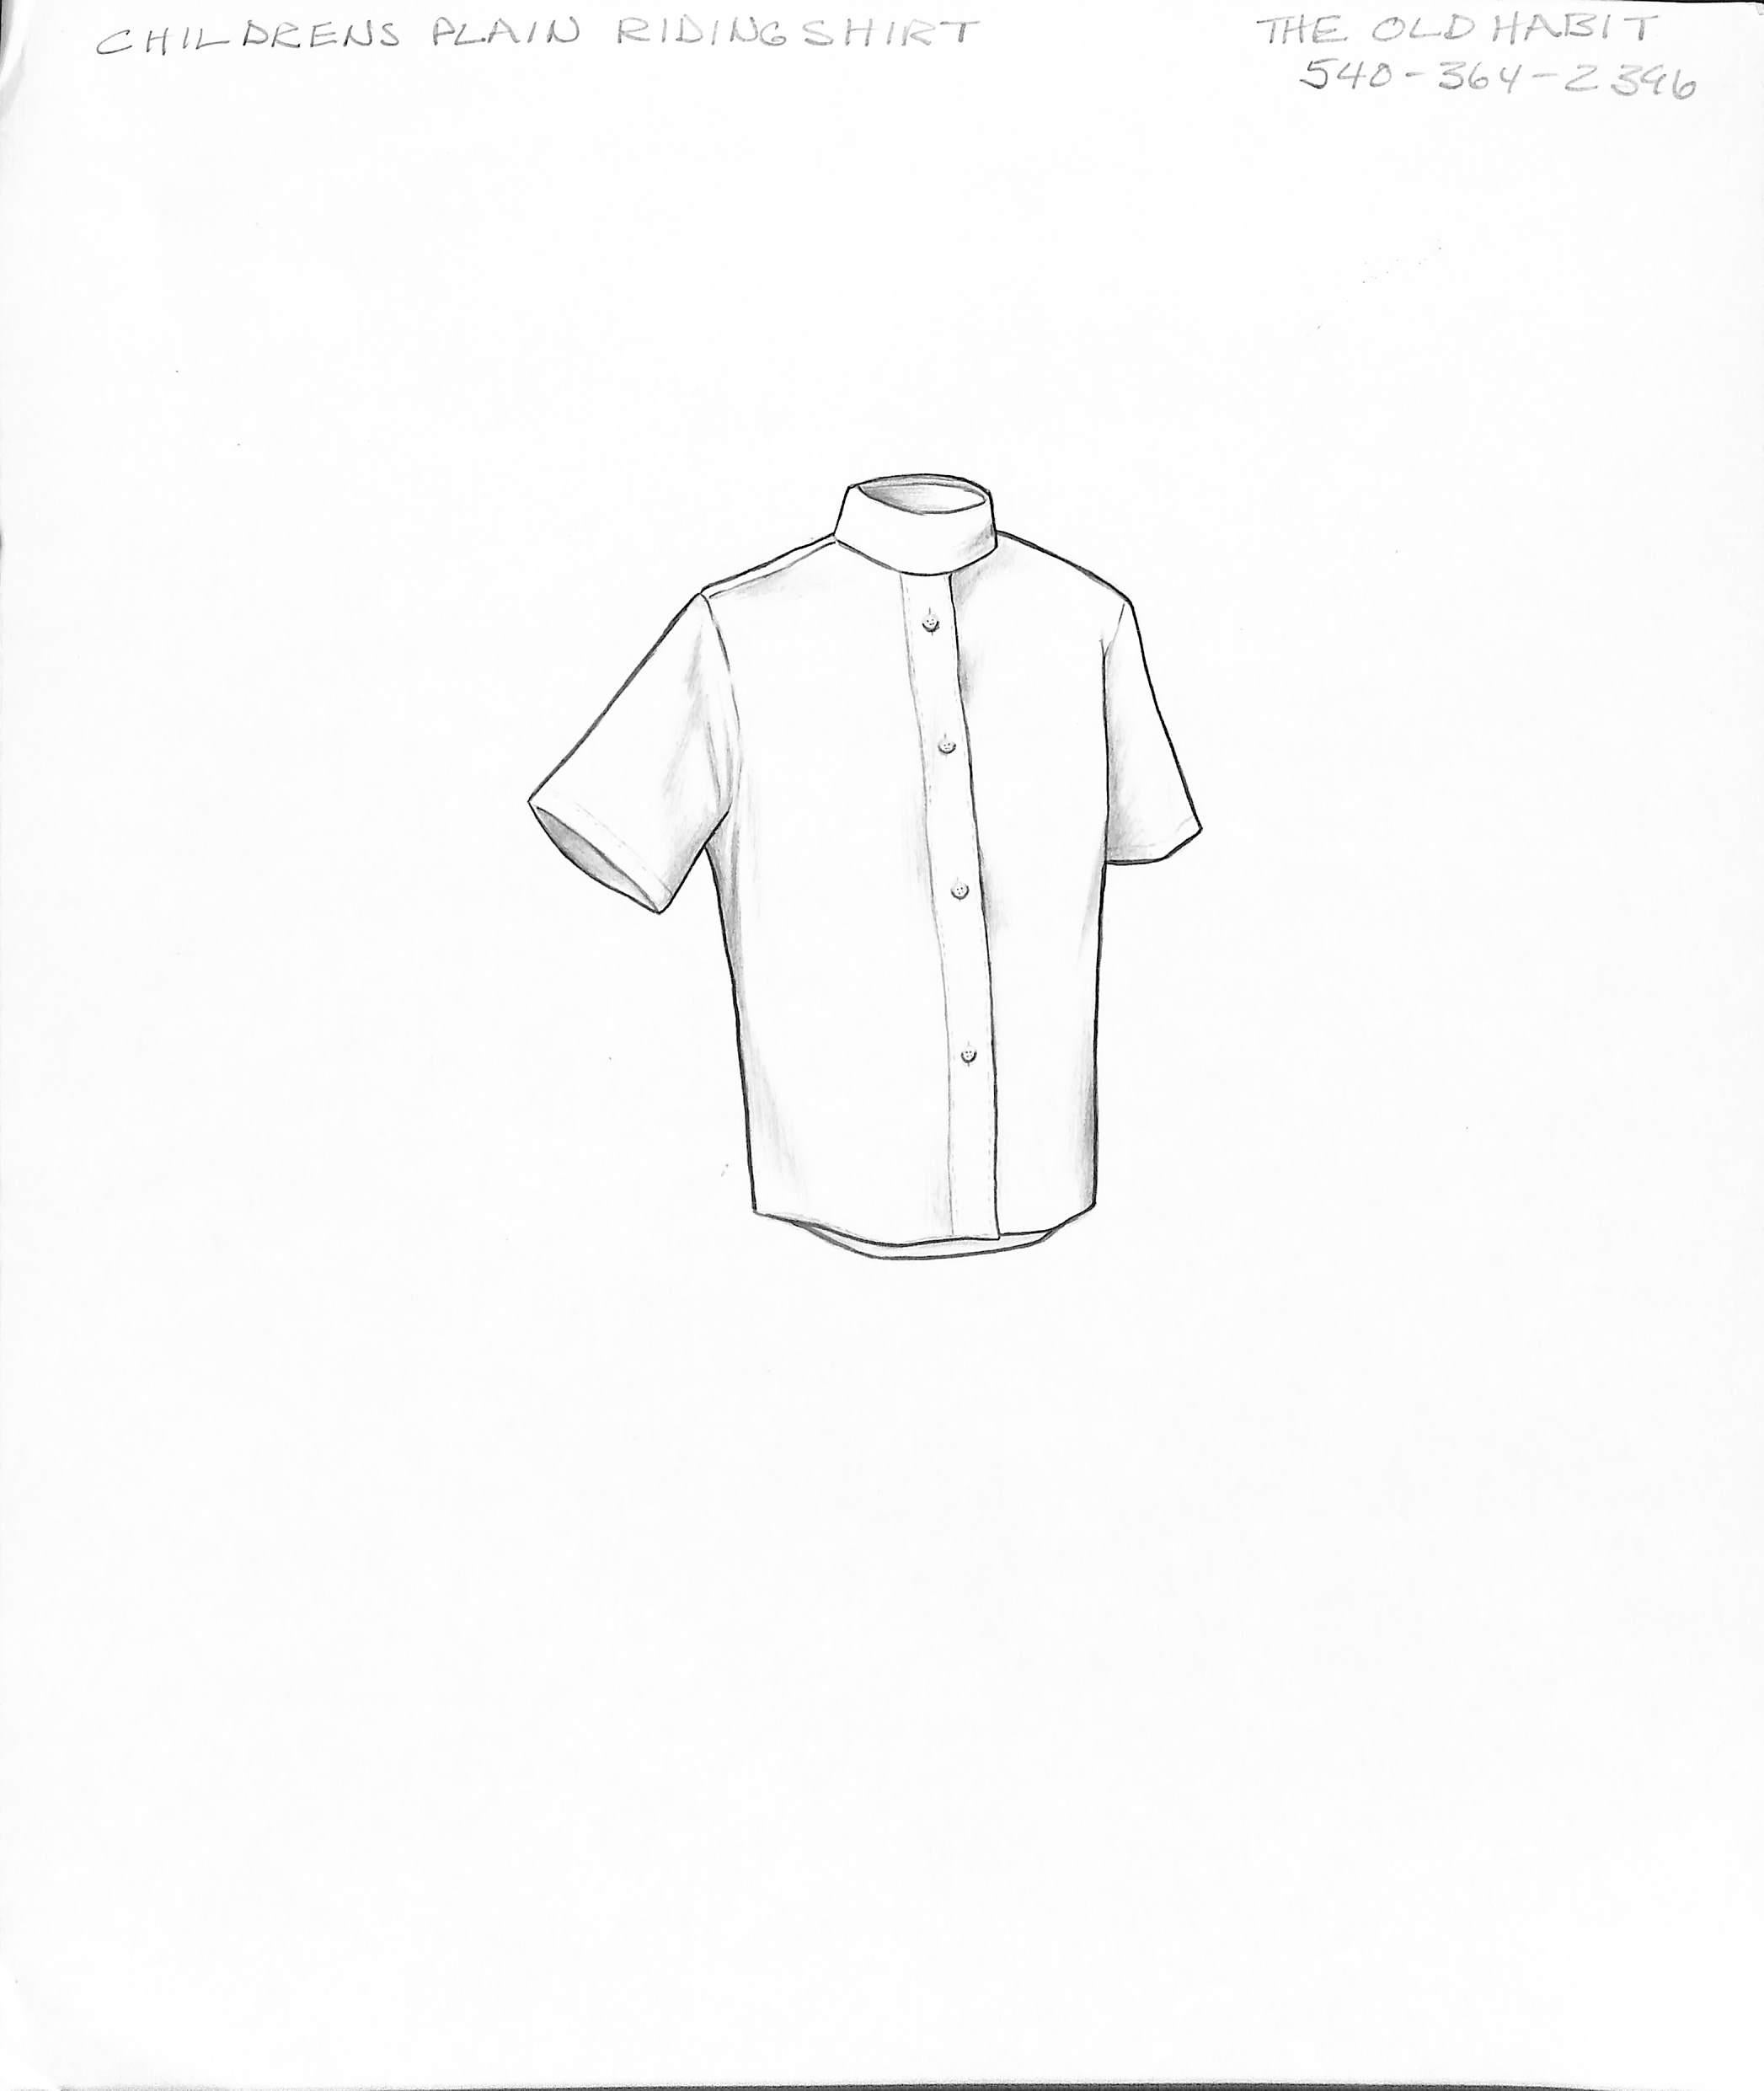 Childrens Plain Riding Shirt Graphite Drawing - Art by Unknown